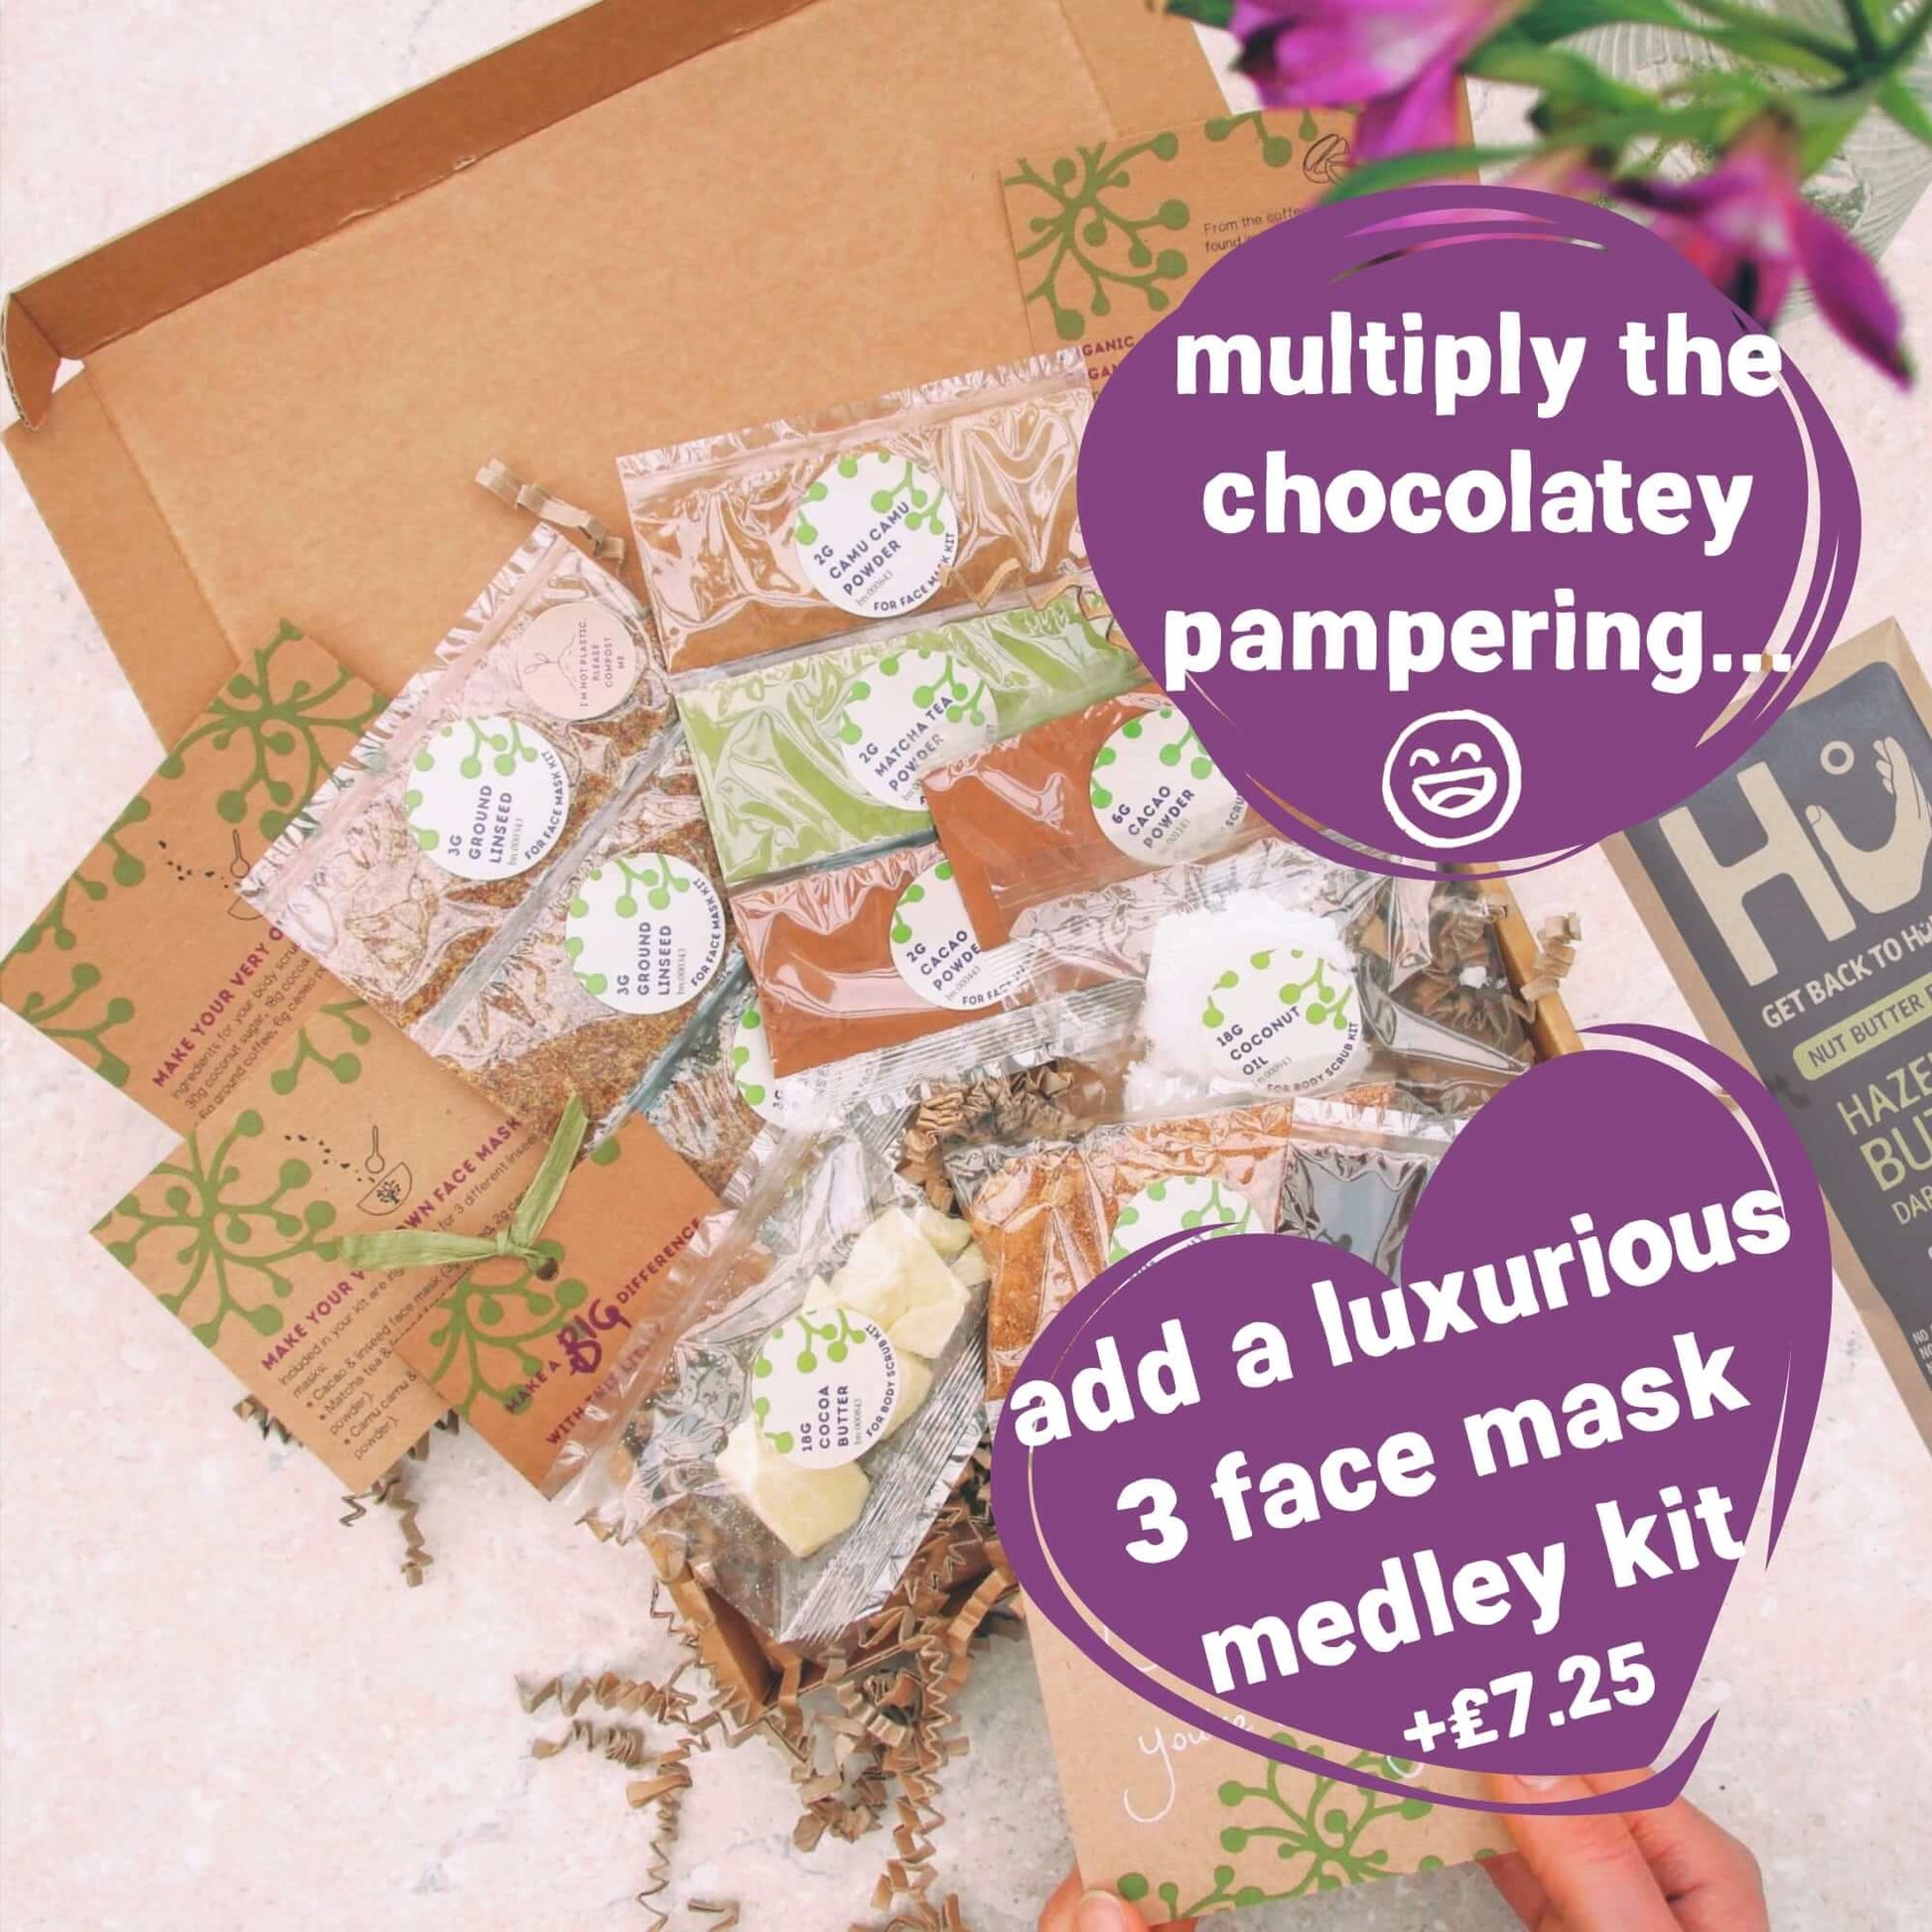 add 3 eco-friendly face mask kits to 40th birthday gift box